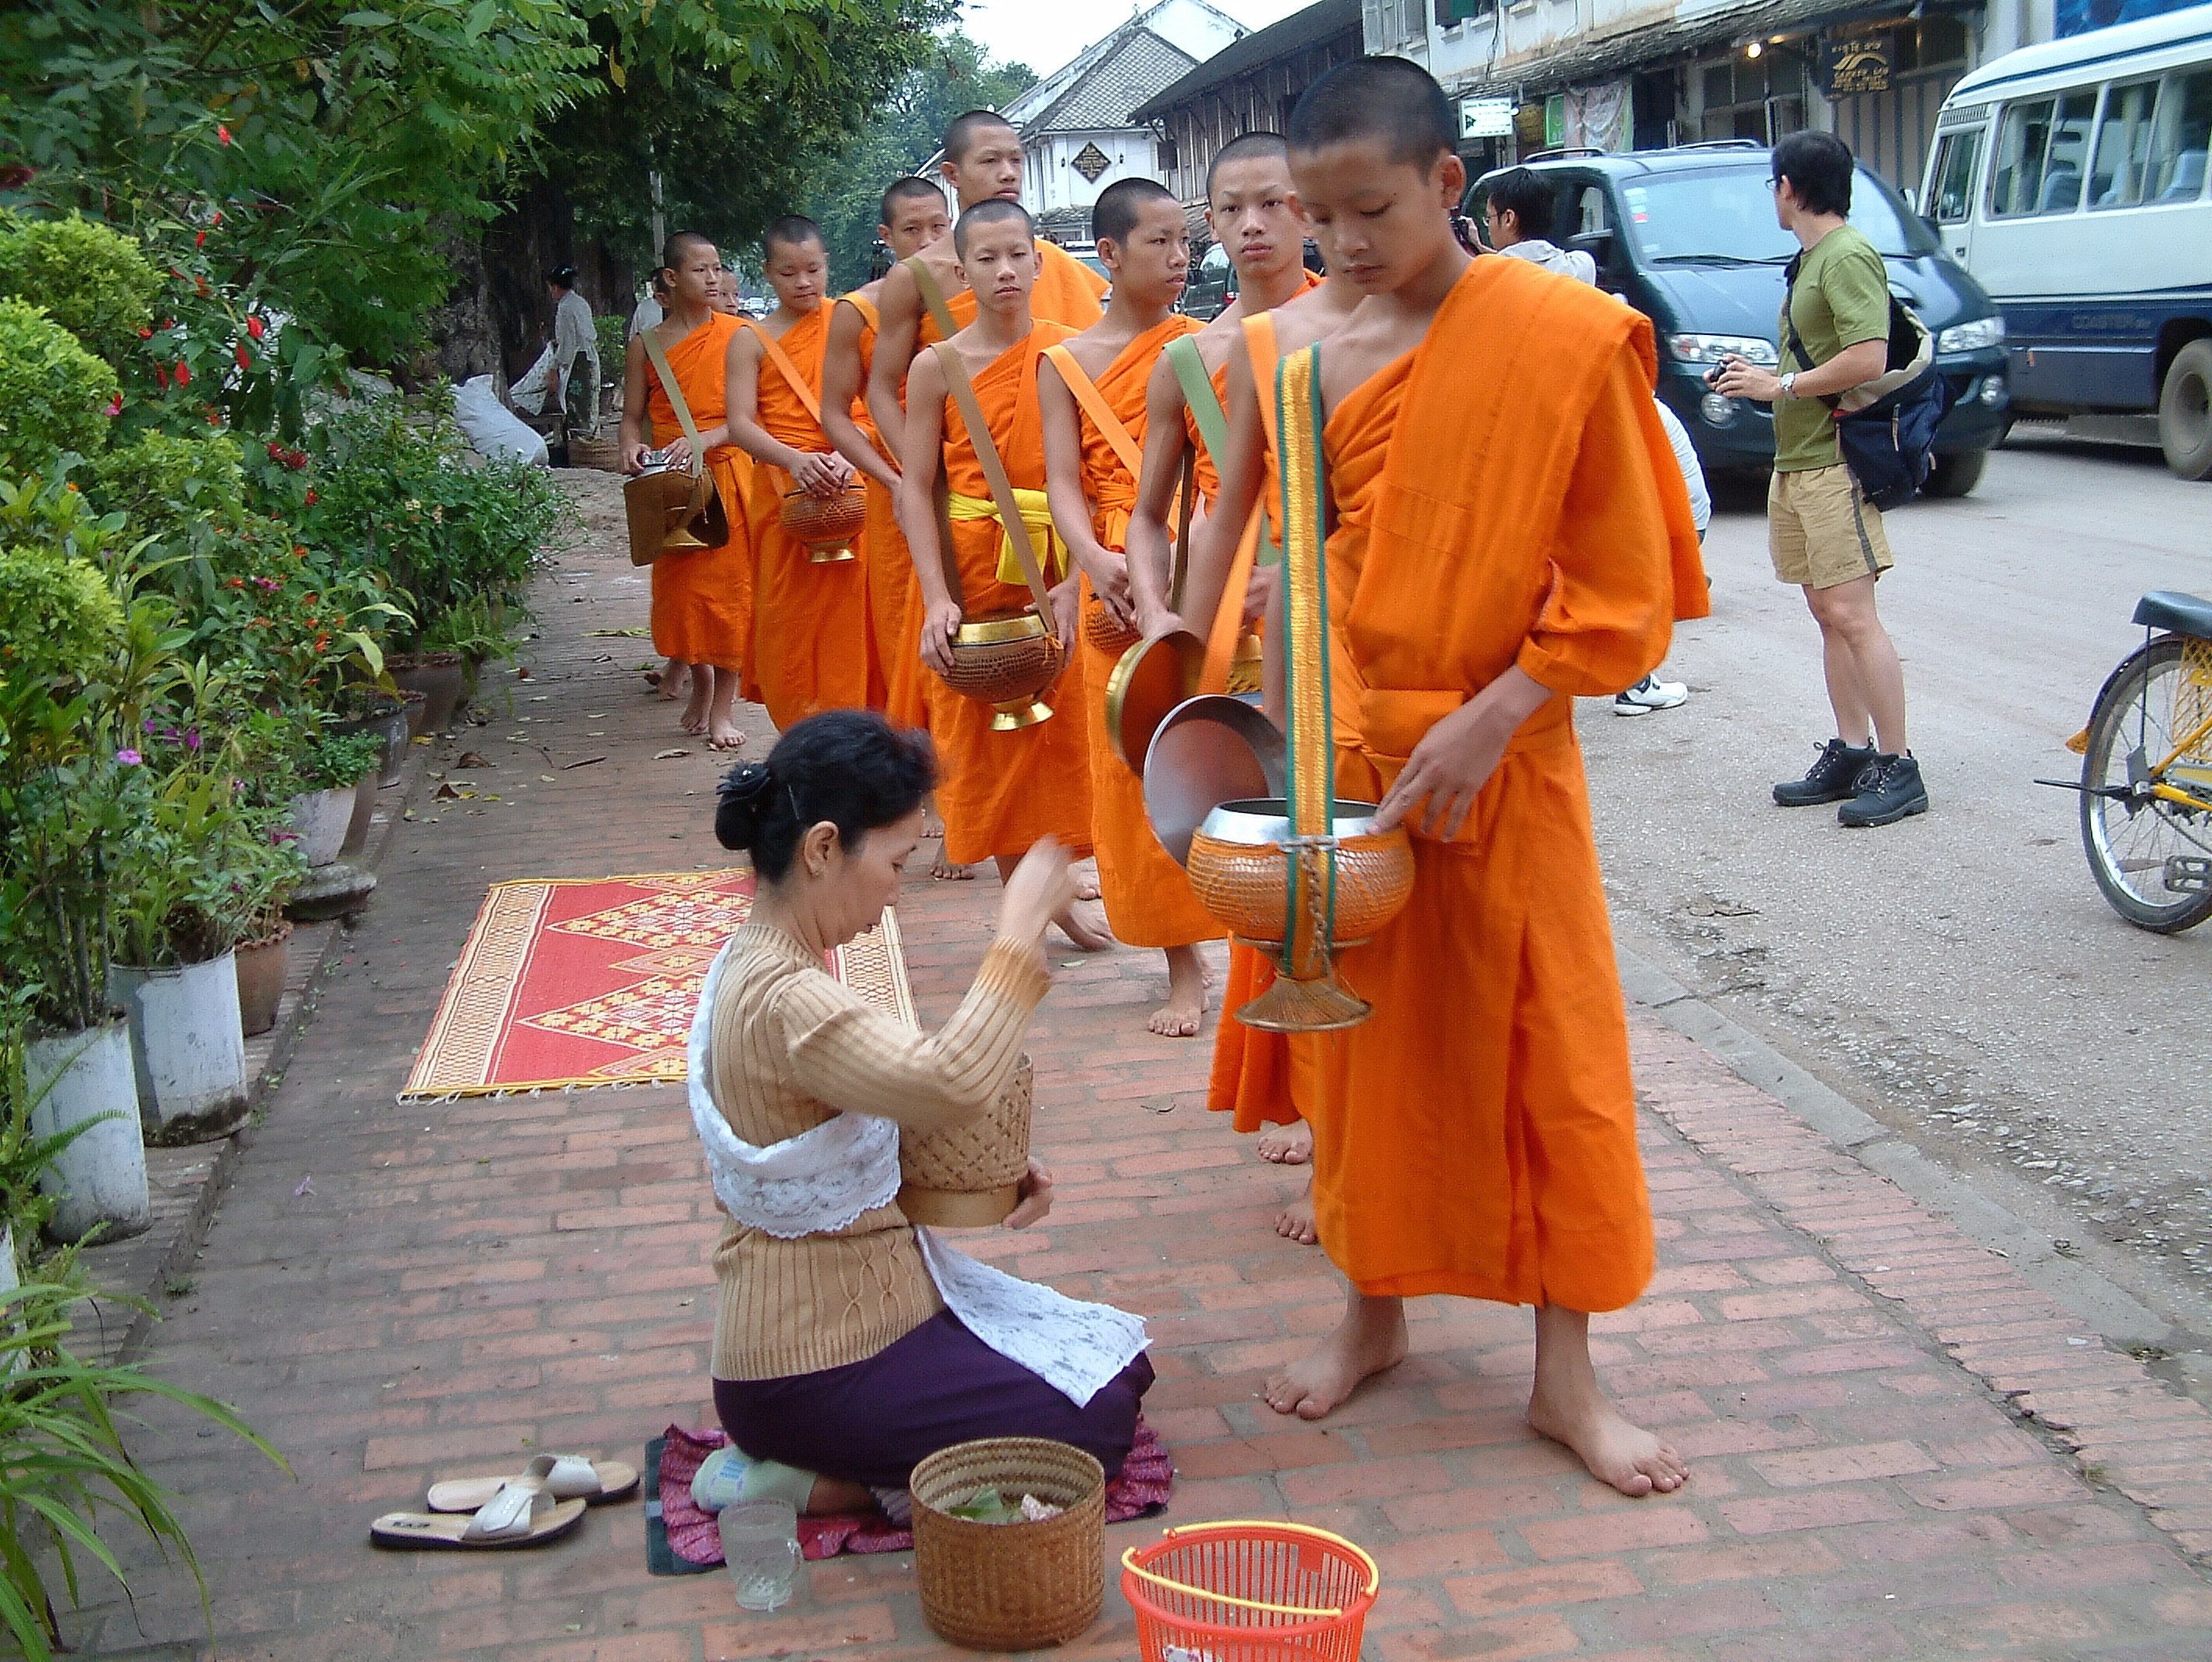 Monks collect Alms in Luang Prabang